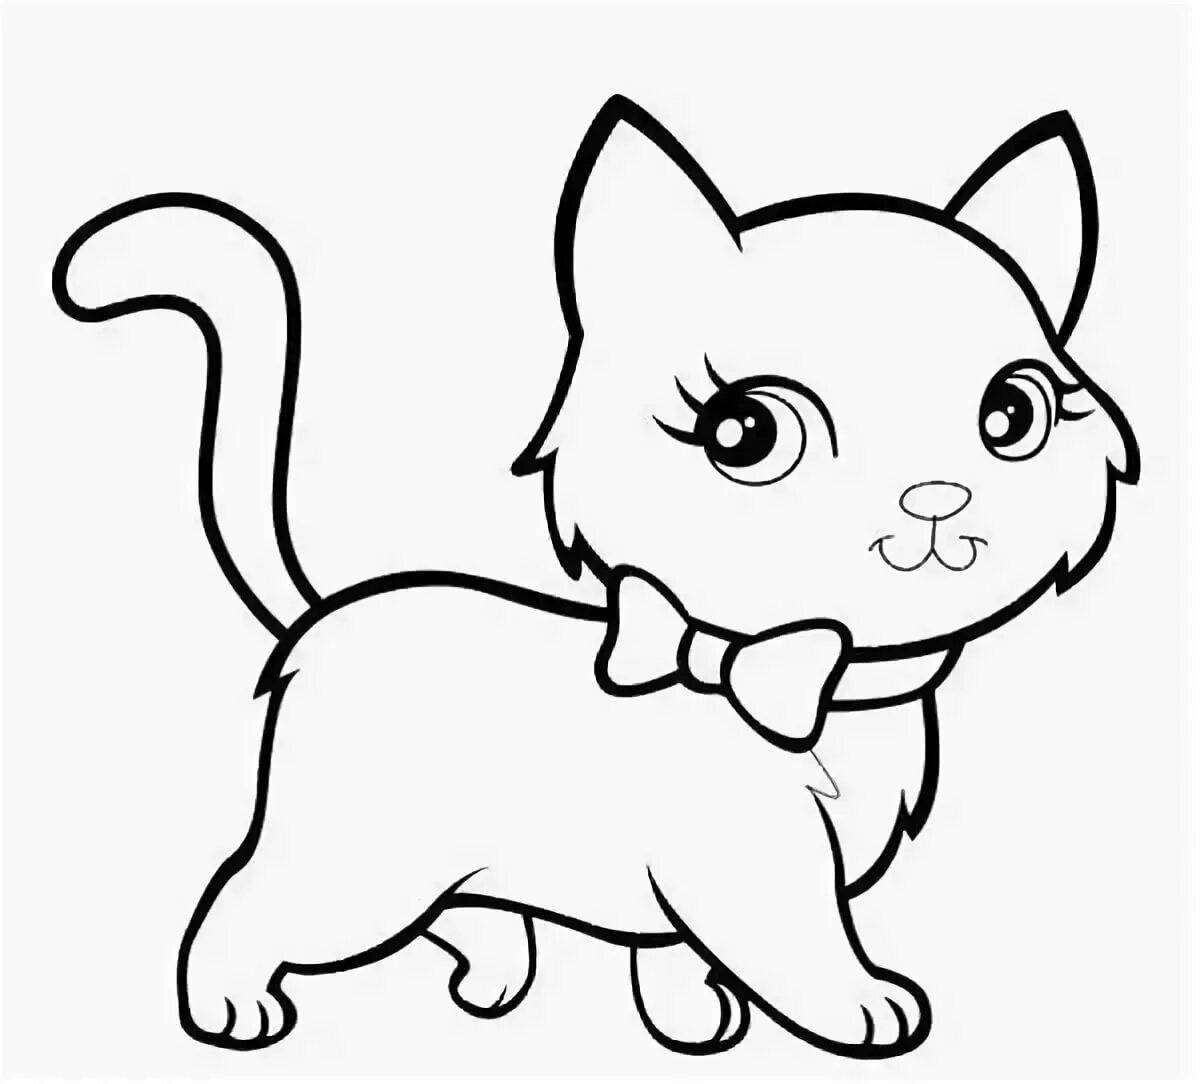 White cat coloring page content